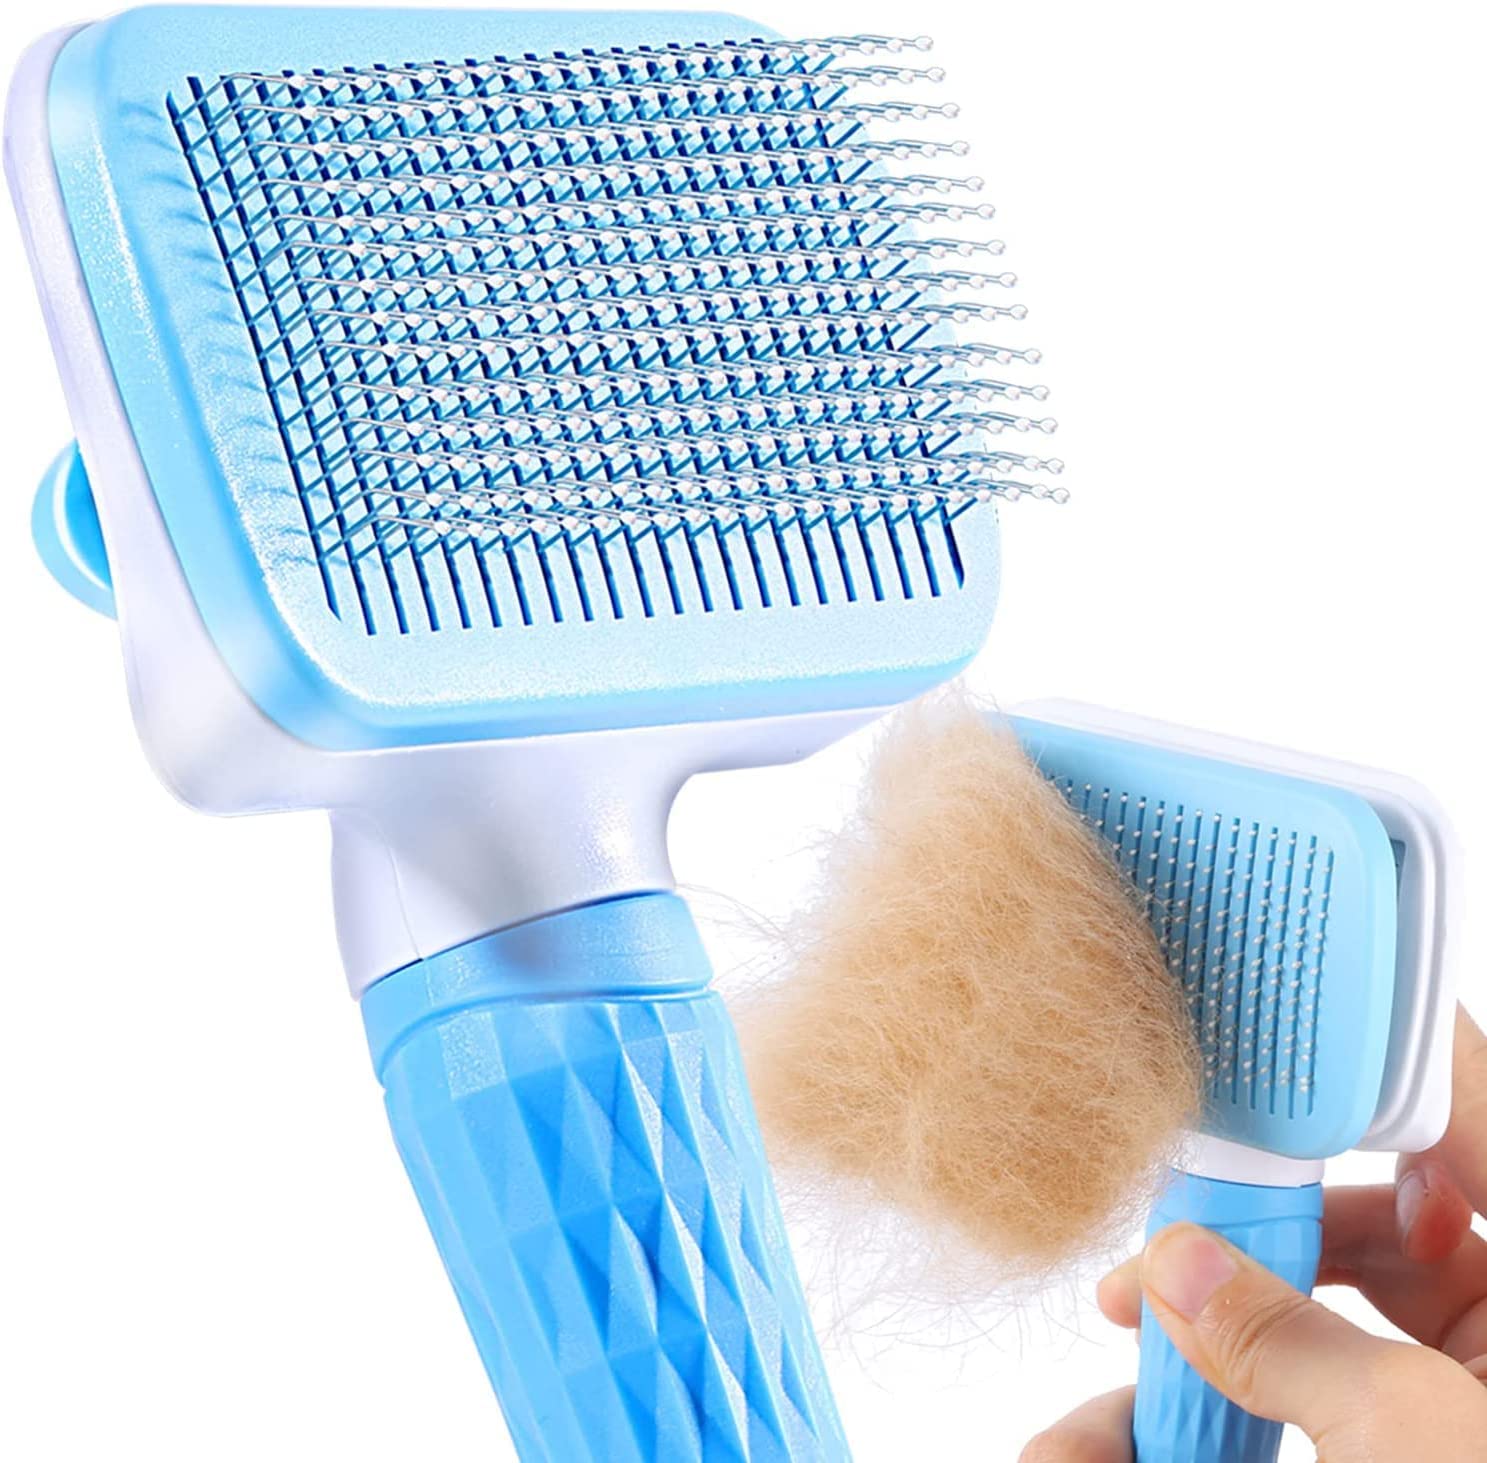 MRIMAYA Self Cleaning Slicker Brush Cat and Dog Pet Hair Removal Brush–Groomer  Shedding Grooming Tools Combs Rakes,Gently Removes Loose Undercoat, Mats  and Tangled Hair price in UAE | Amazon UAE | supermarket